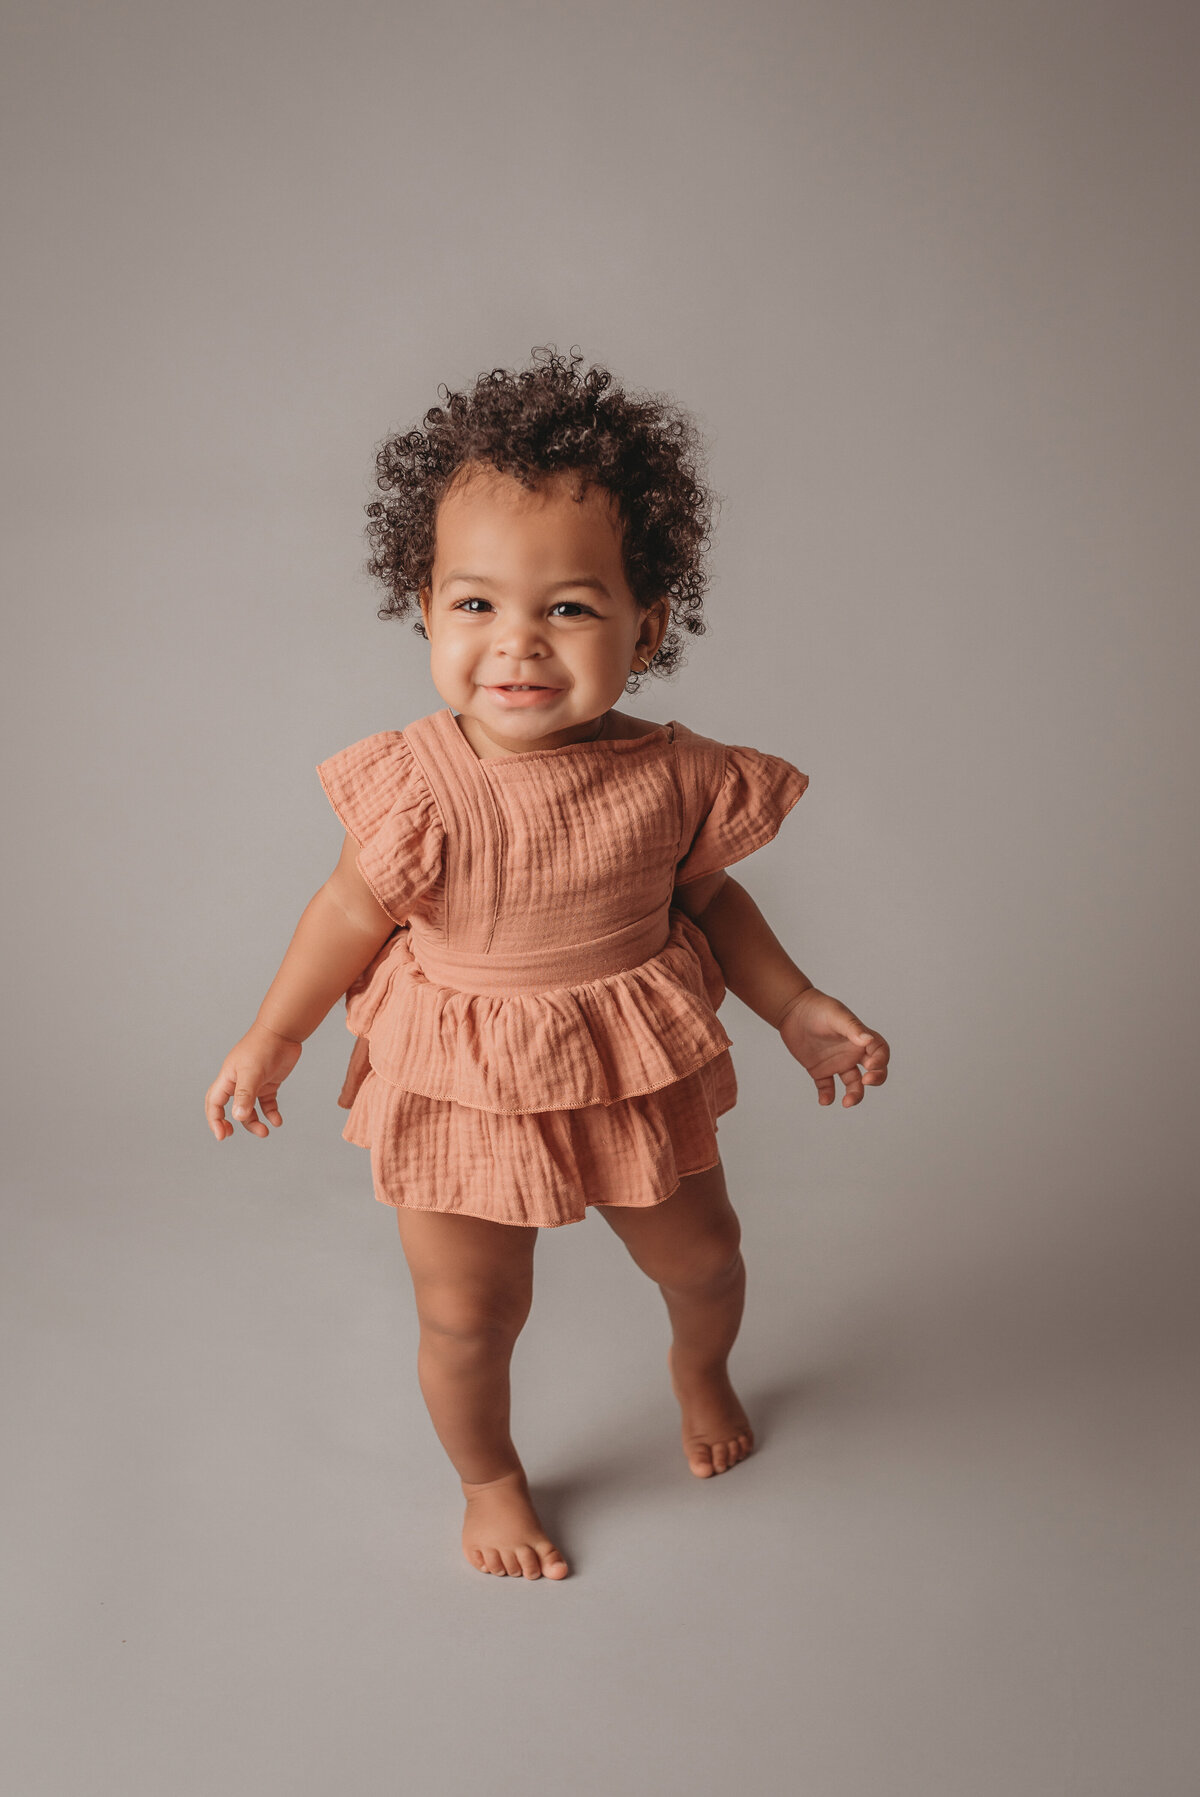 One year old baby girl standing up wearing peach colored ruffle romper on light grey backdrop